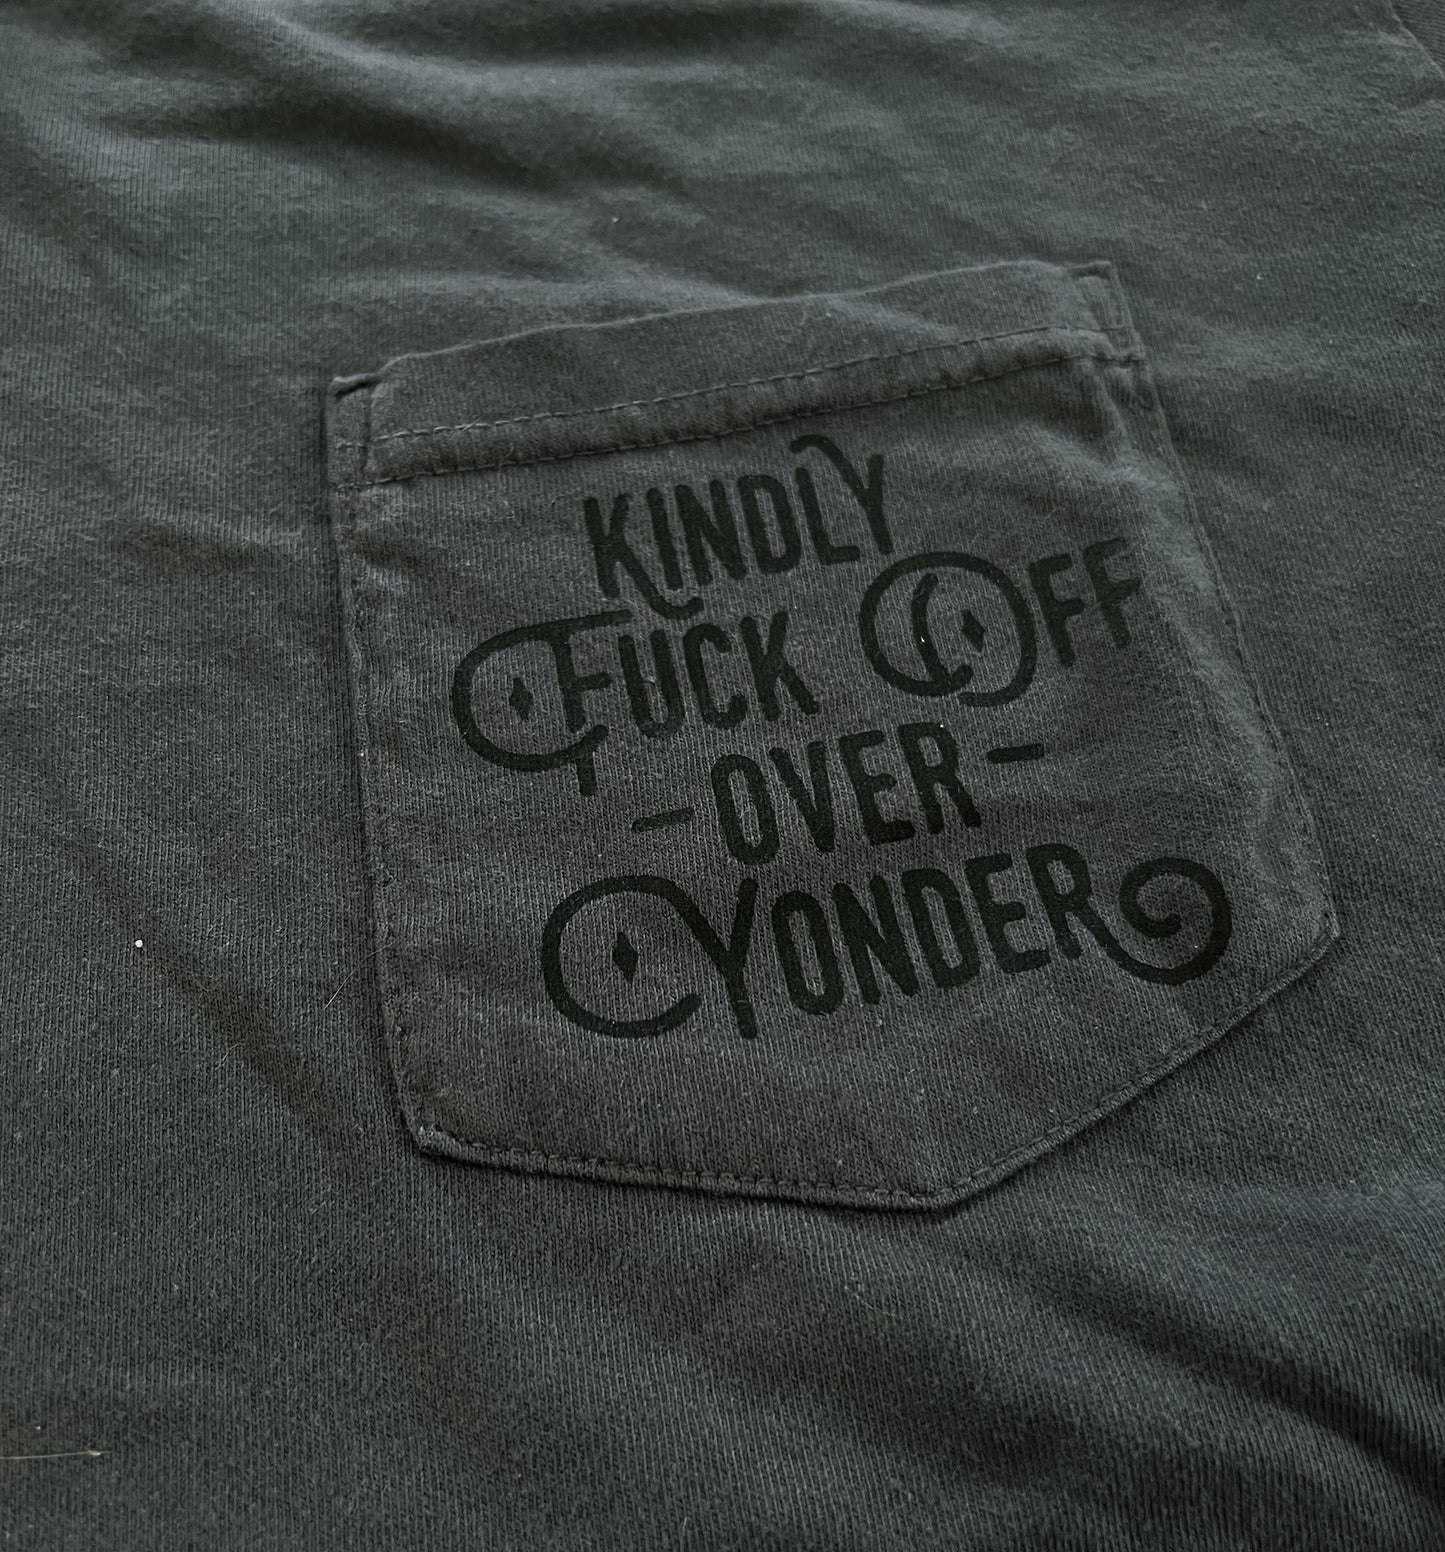 Kindly F off // t-shirt